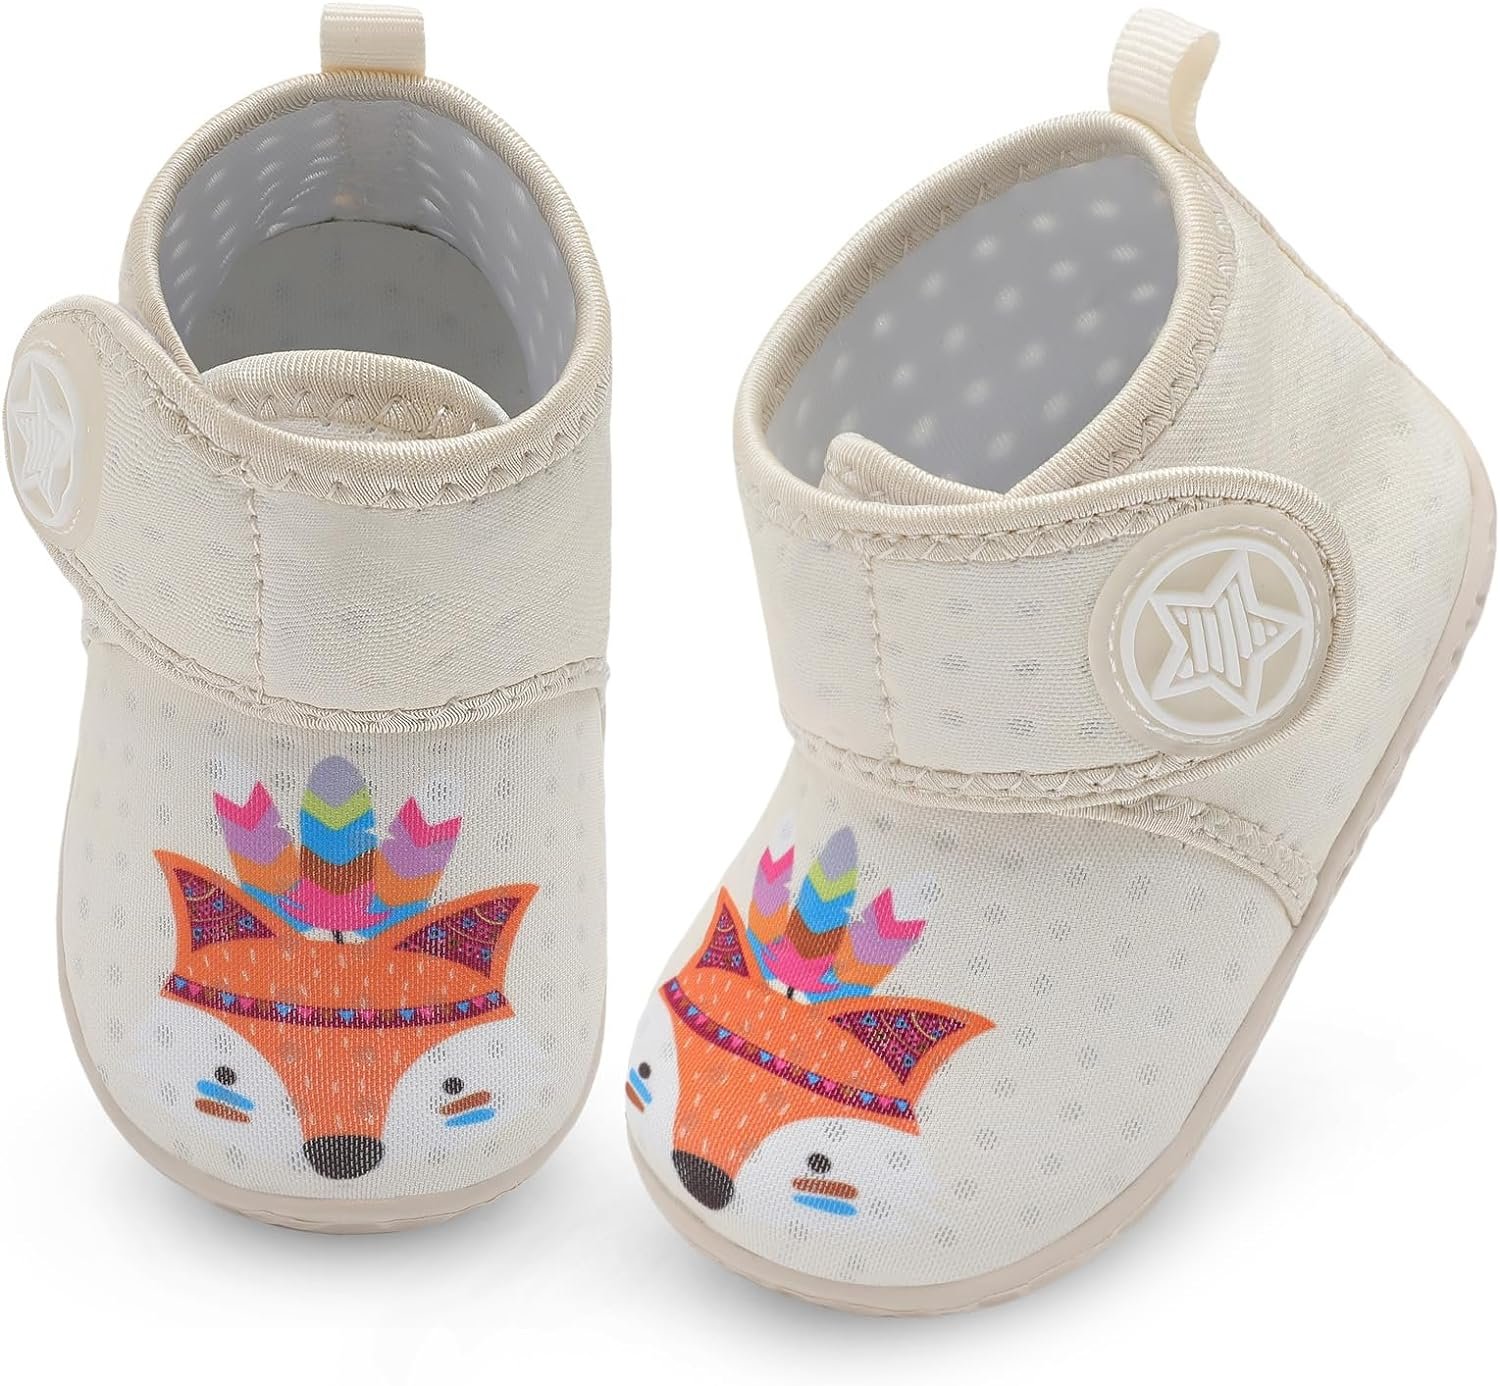 JOINFREE Baby Girls Boys Slippers Breathable Infant Shoes Non-slip First Walking Shoes Crib Shoes Indoor Outdoor